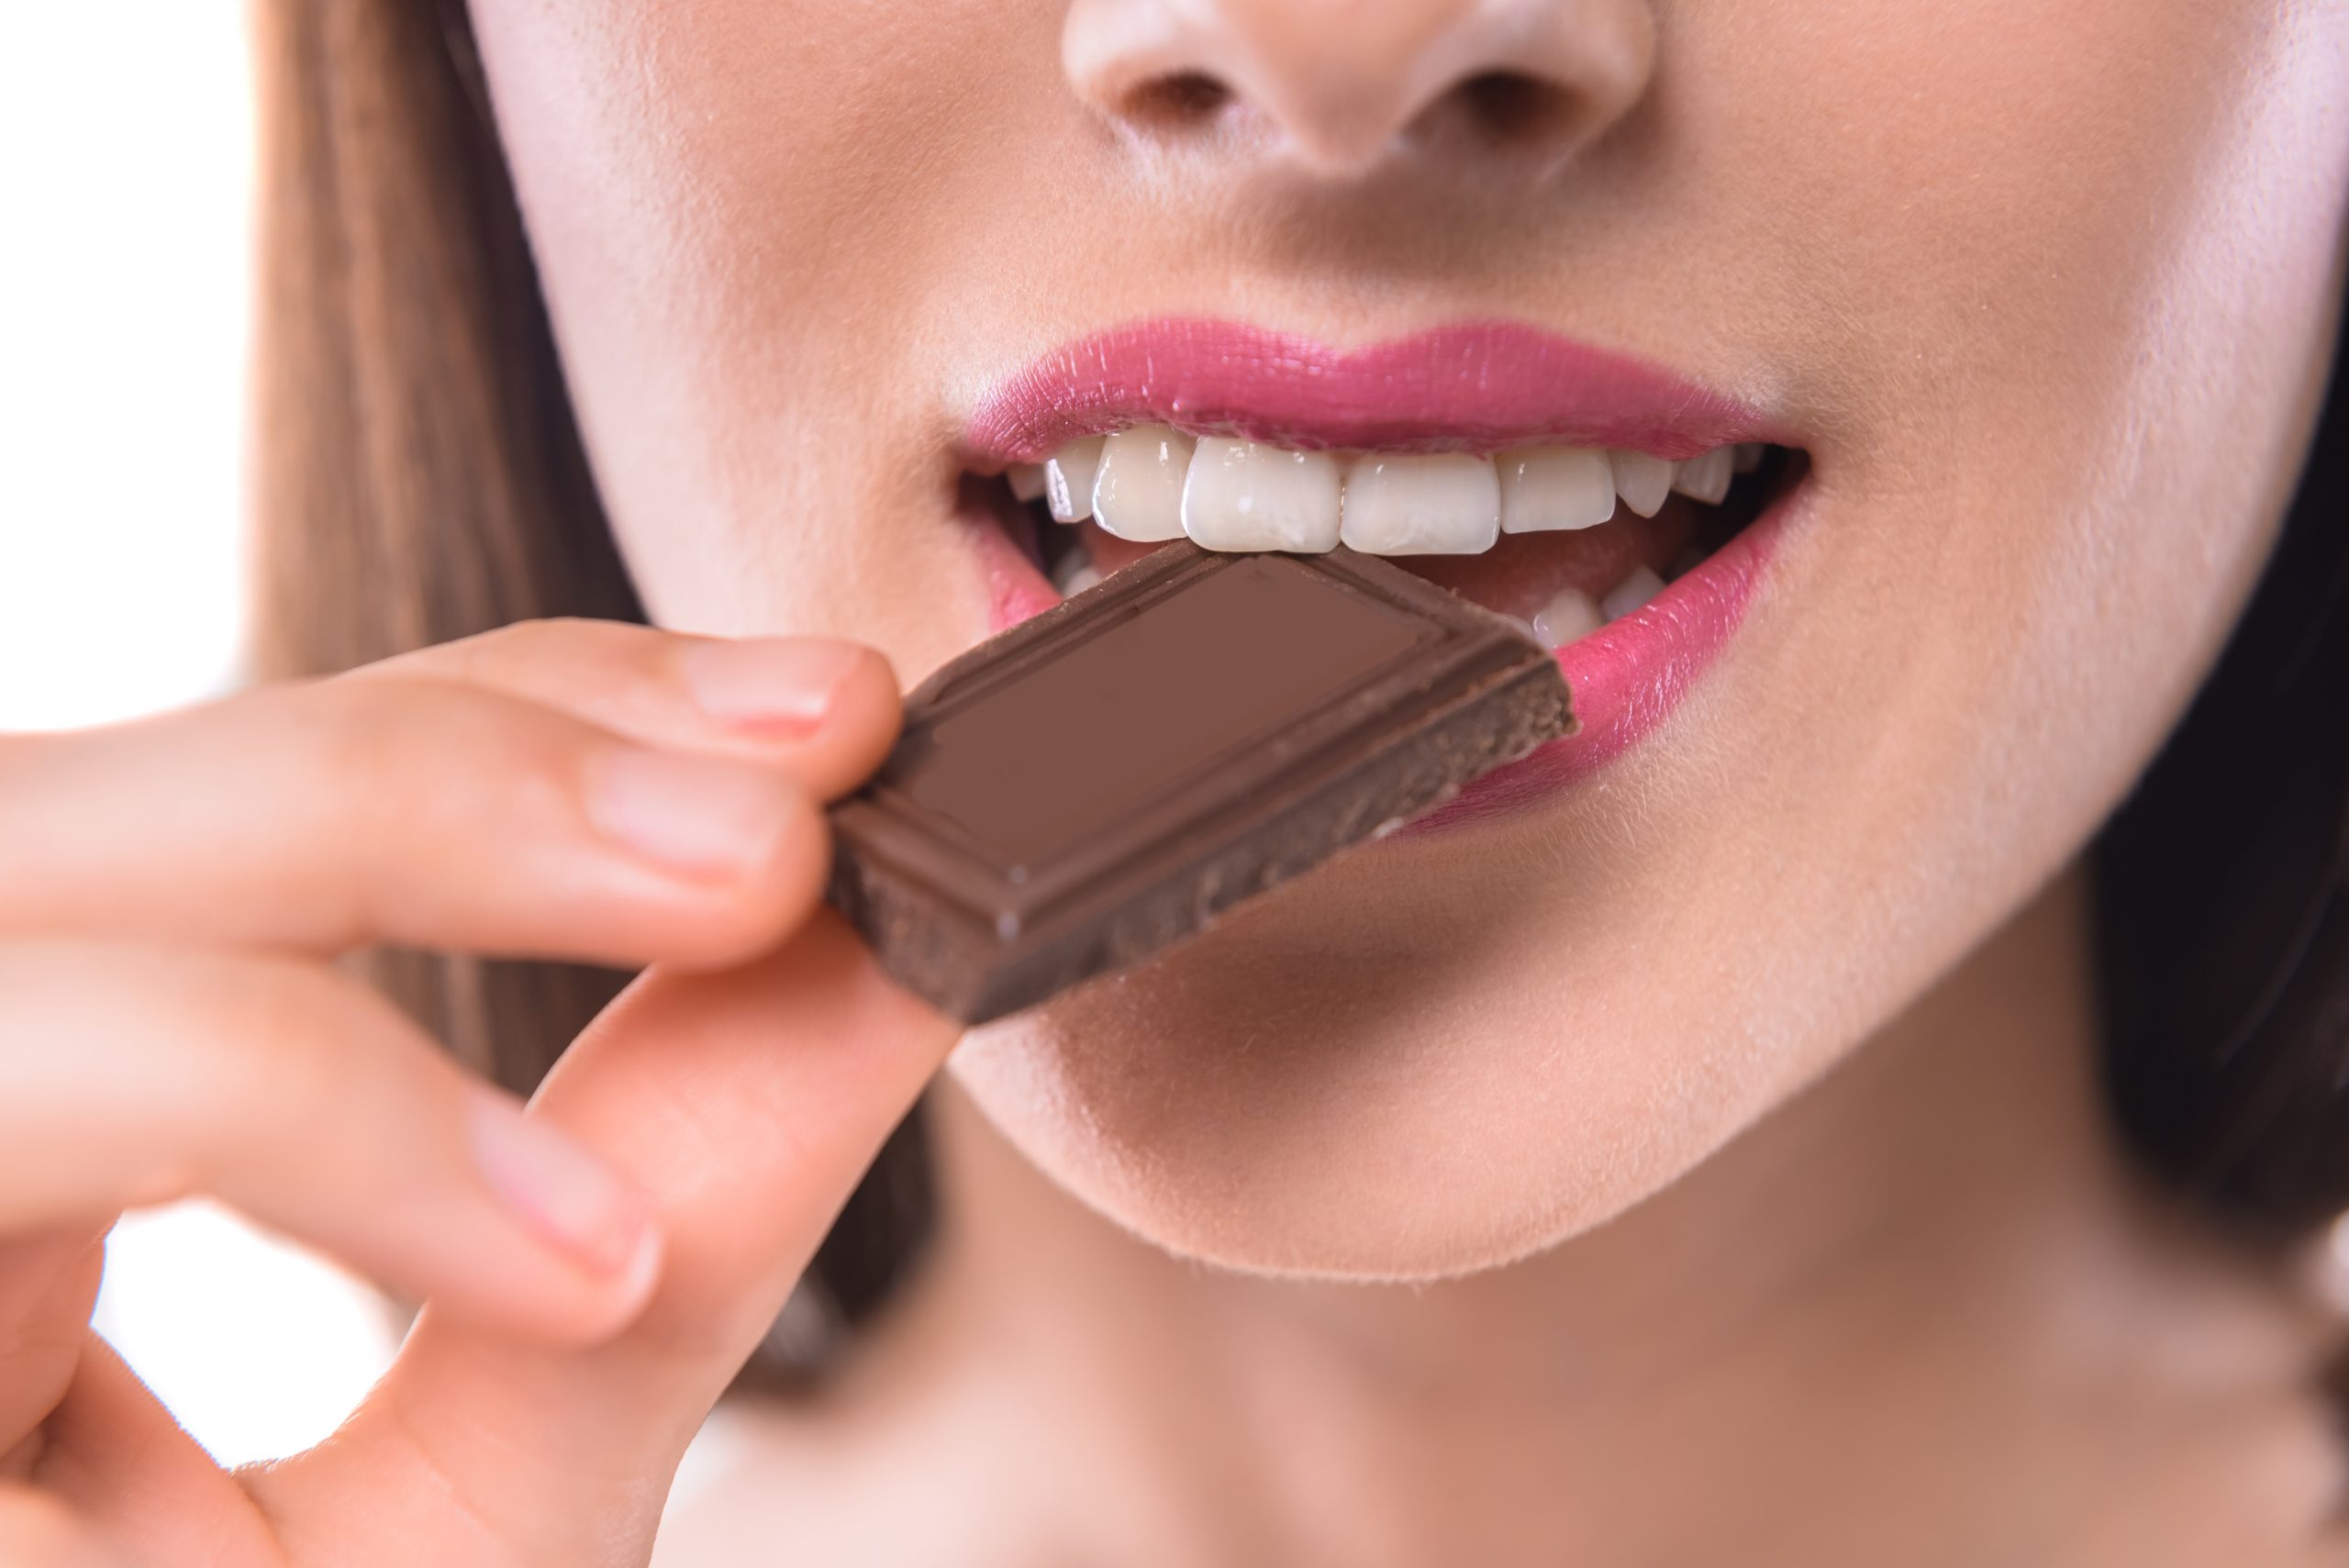 Closeup view of a woman taking a small bite of chocolate.